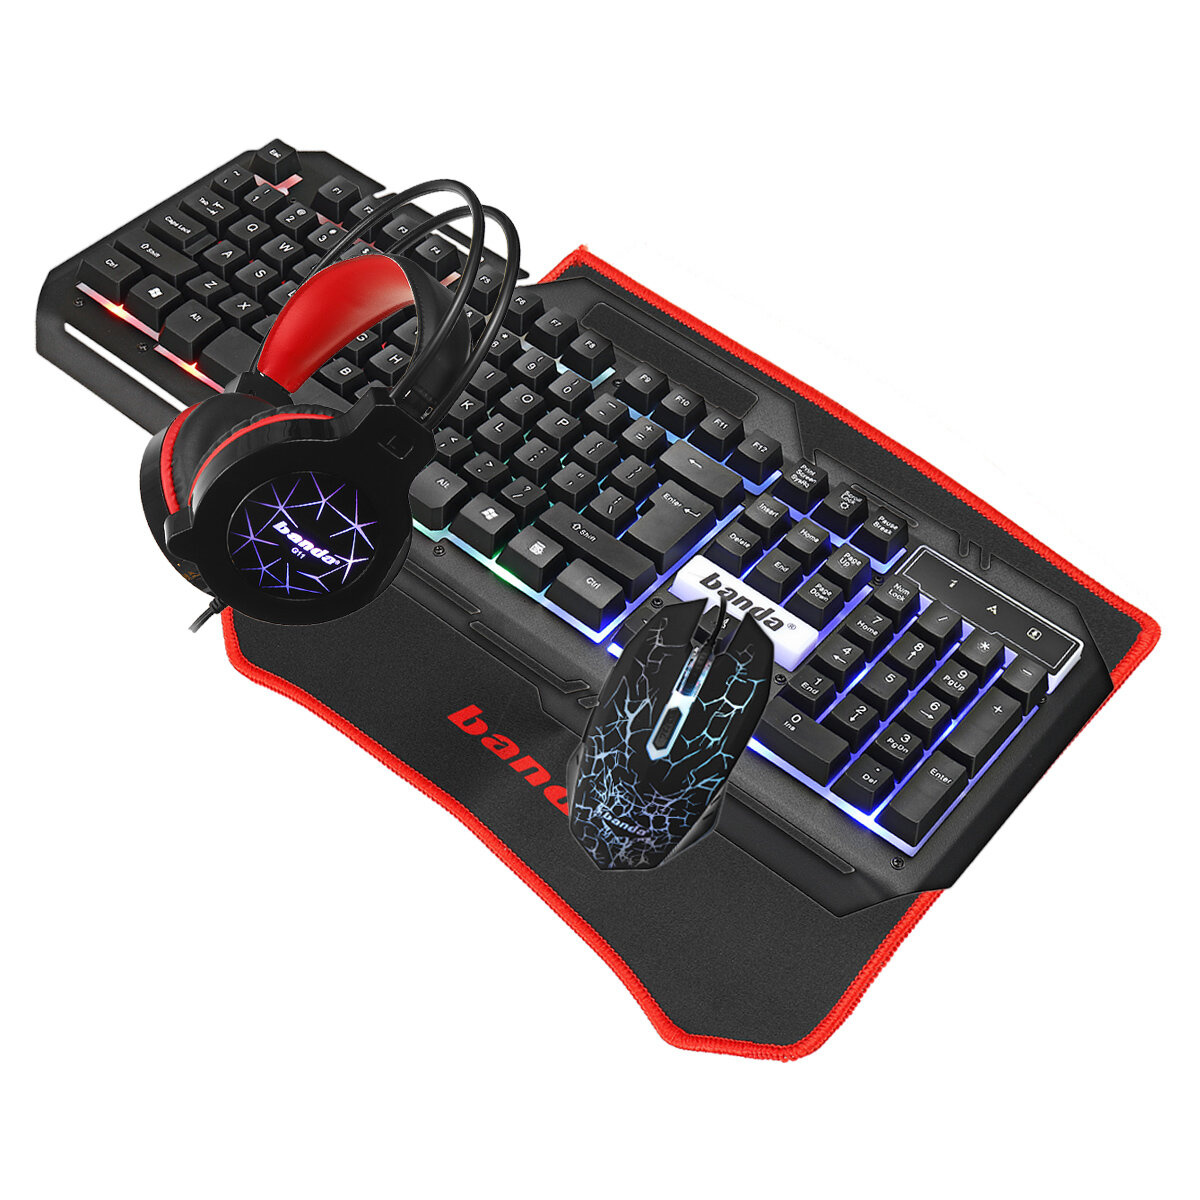 BANDA G11 Keyboard Mouse Combo 104 Keys Suspended Keycaps Gaming Keyboard 6 Buttons 3600DPI LED Light Optical Mouse Ster